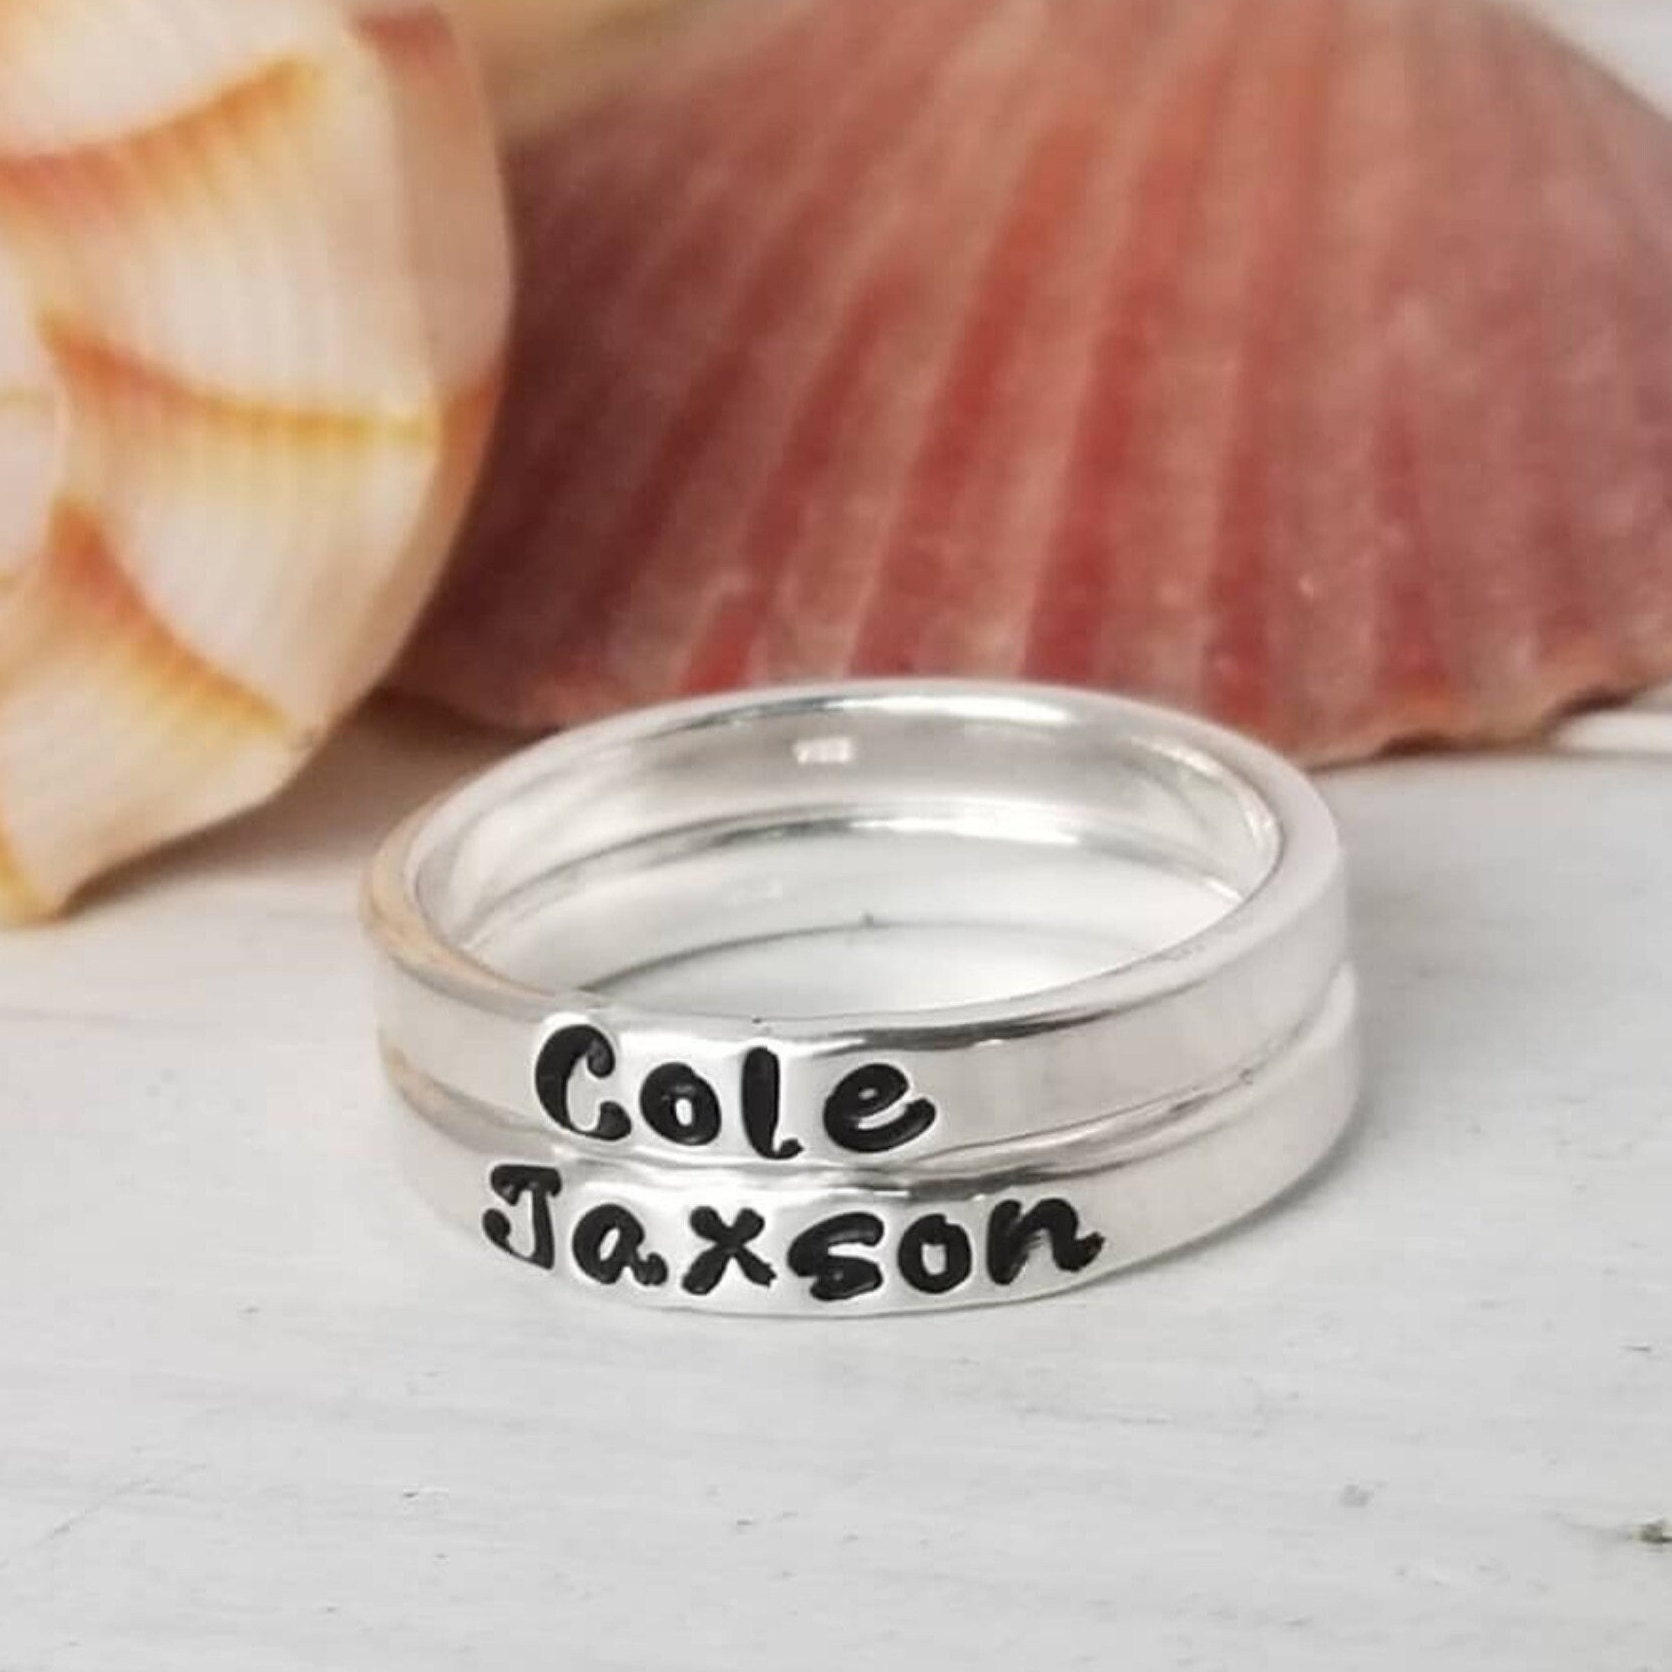 Costum Personalized Name Ring in gold & Silver Free shipping|Simply Bo